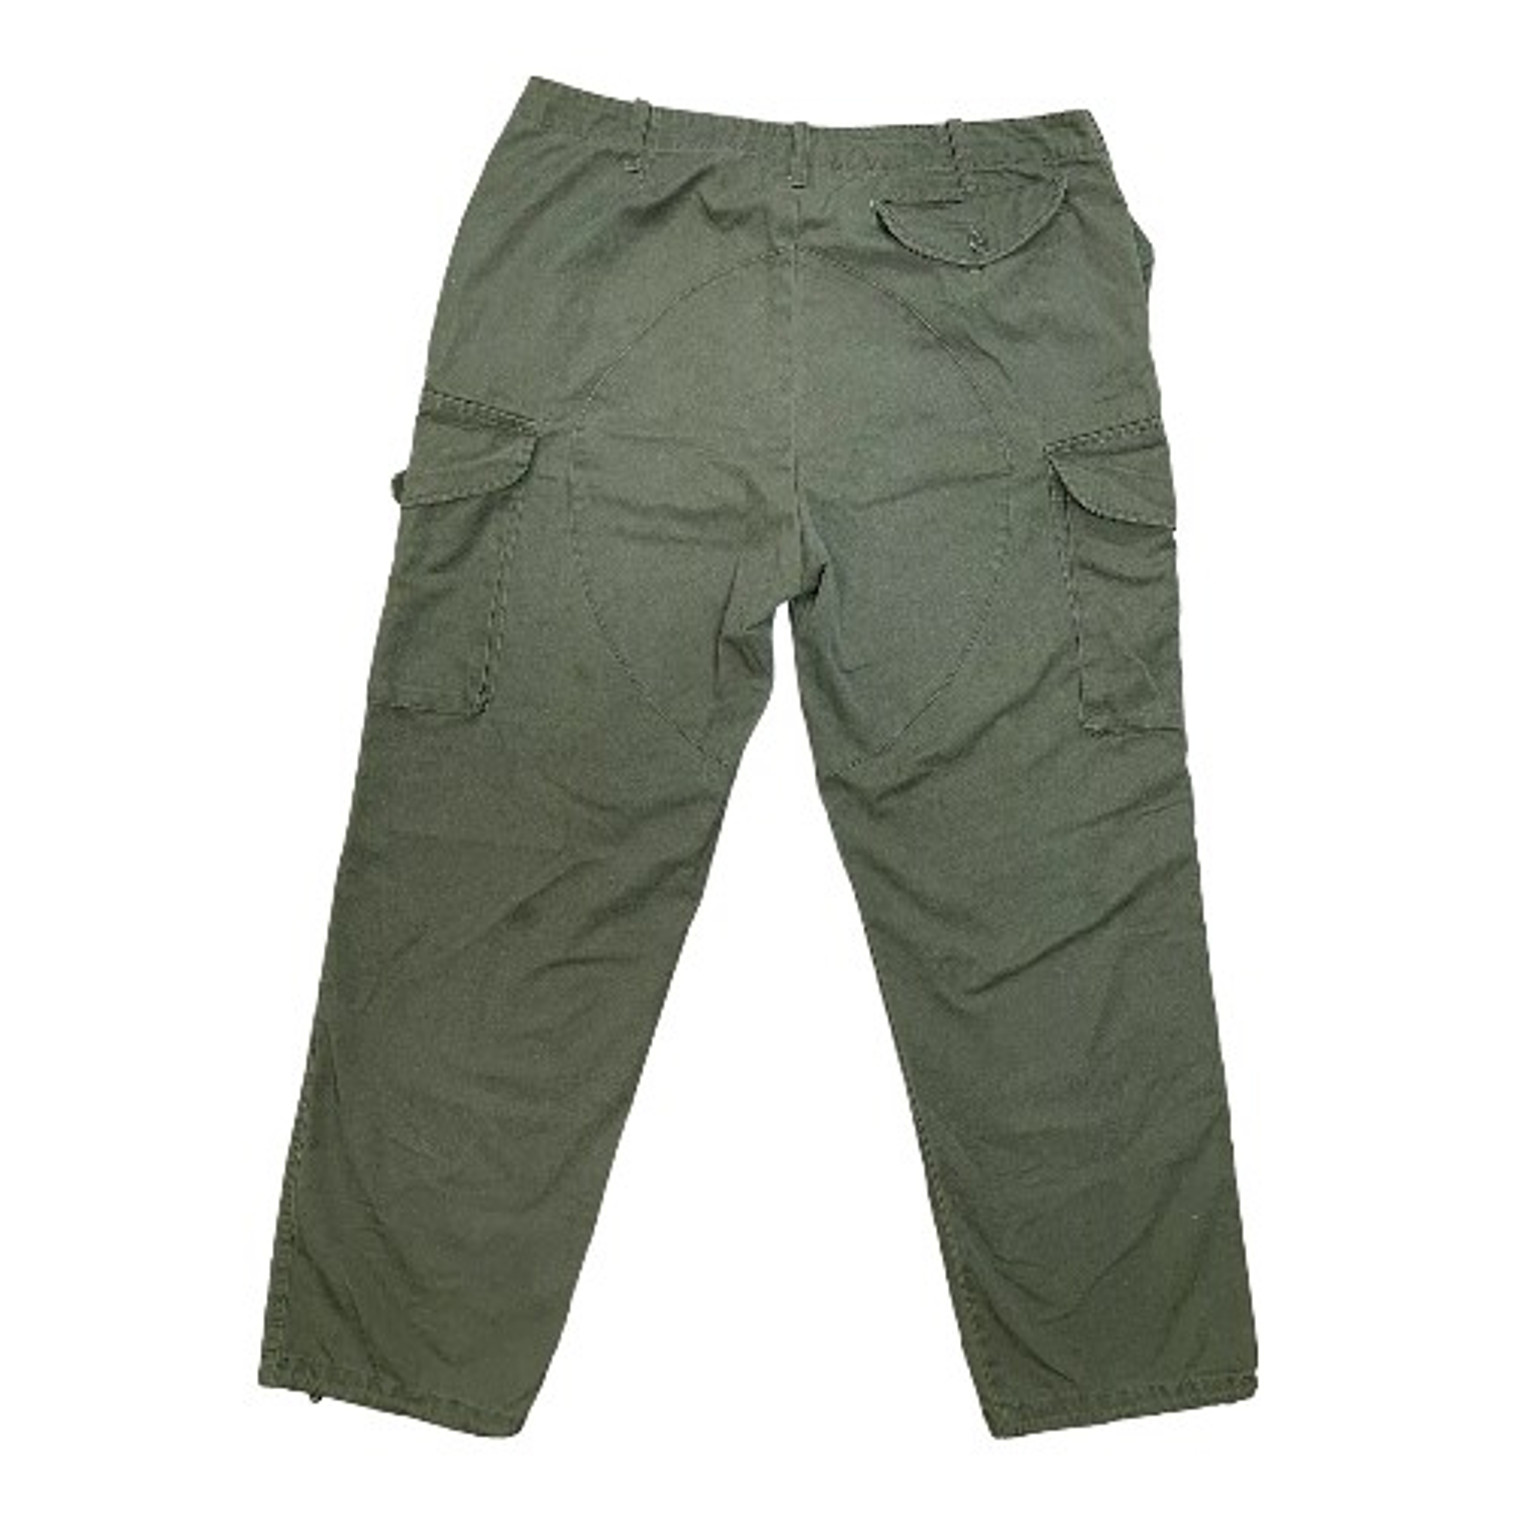 Vintage JackField Military Style Green Cargo Pants - Size 40